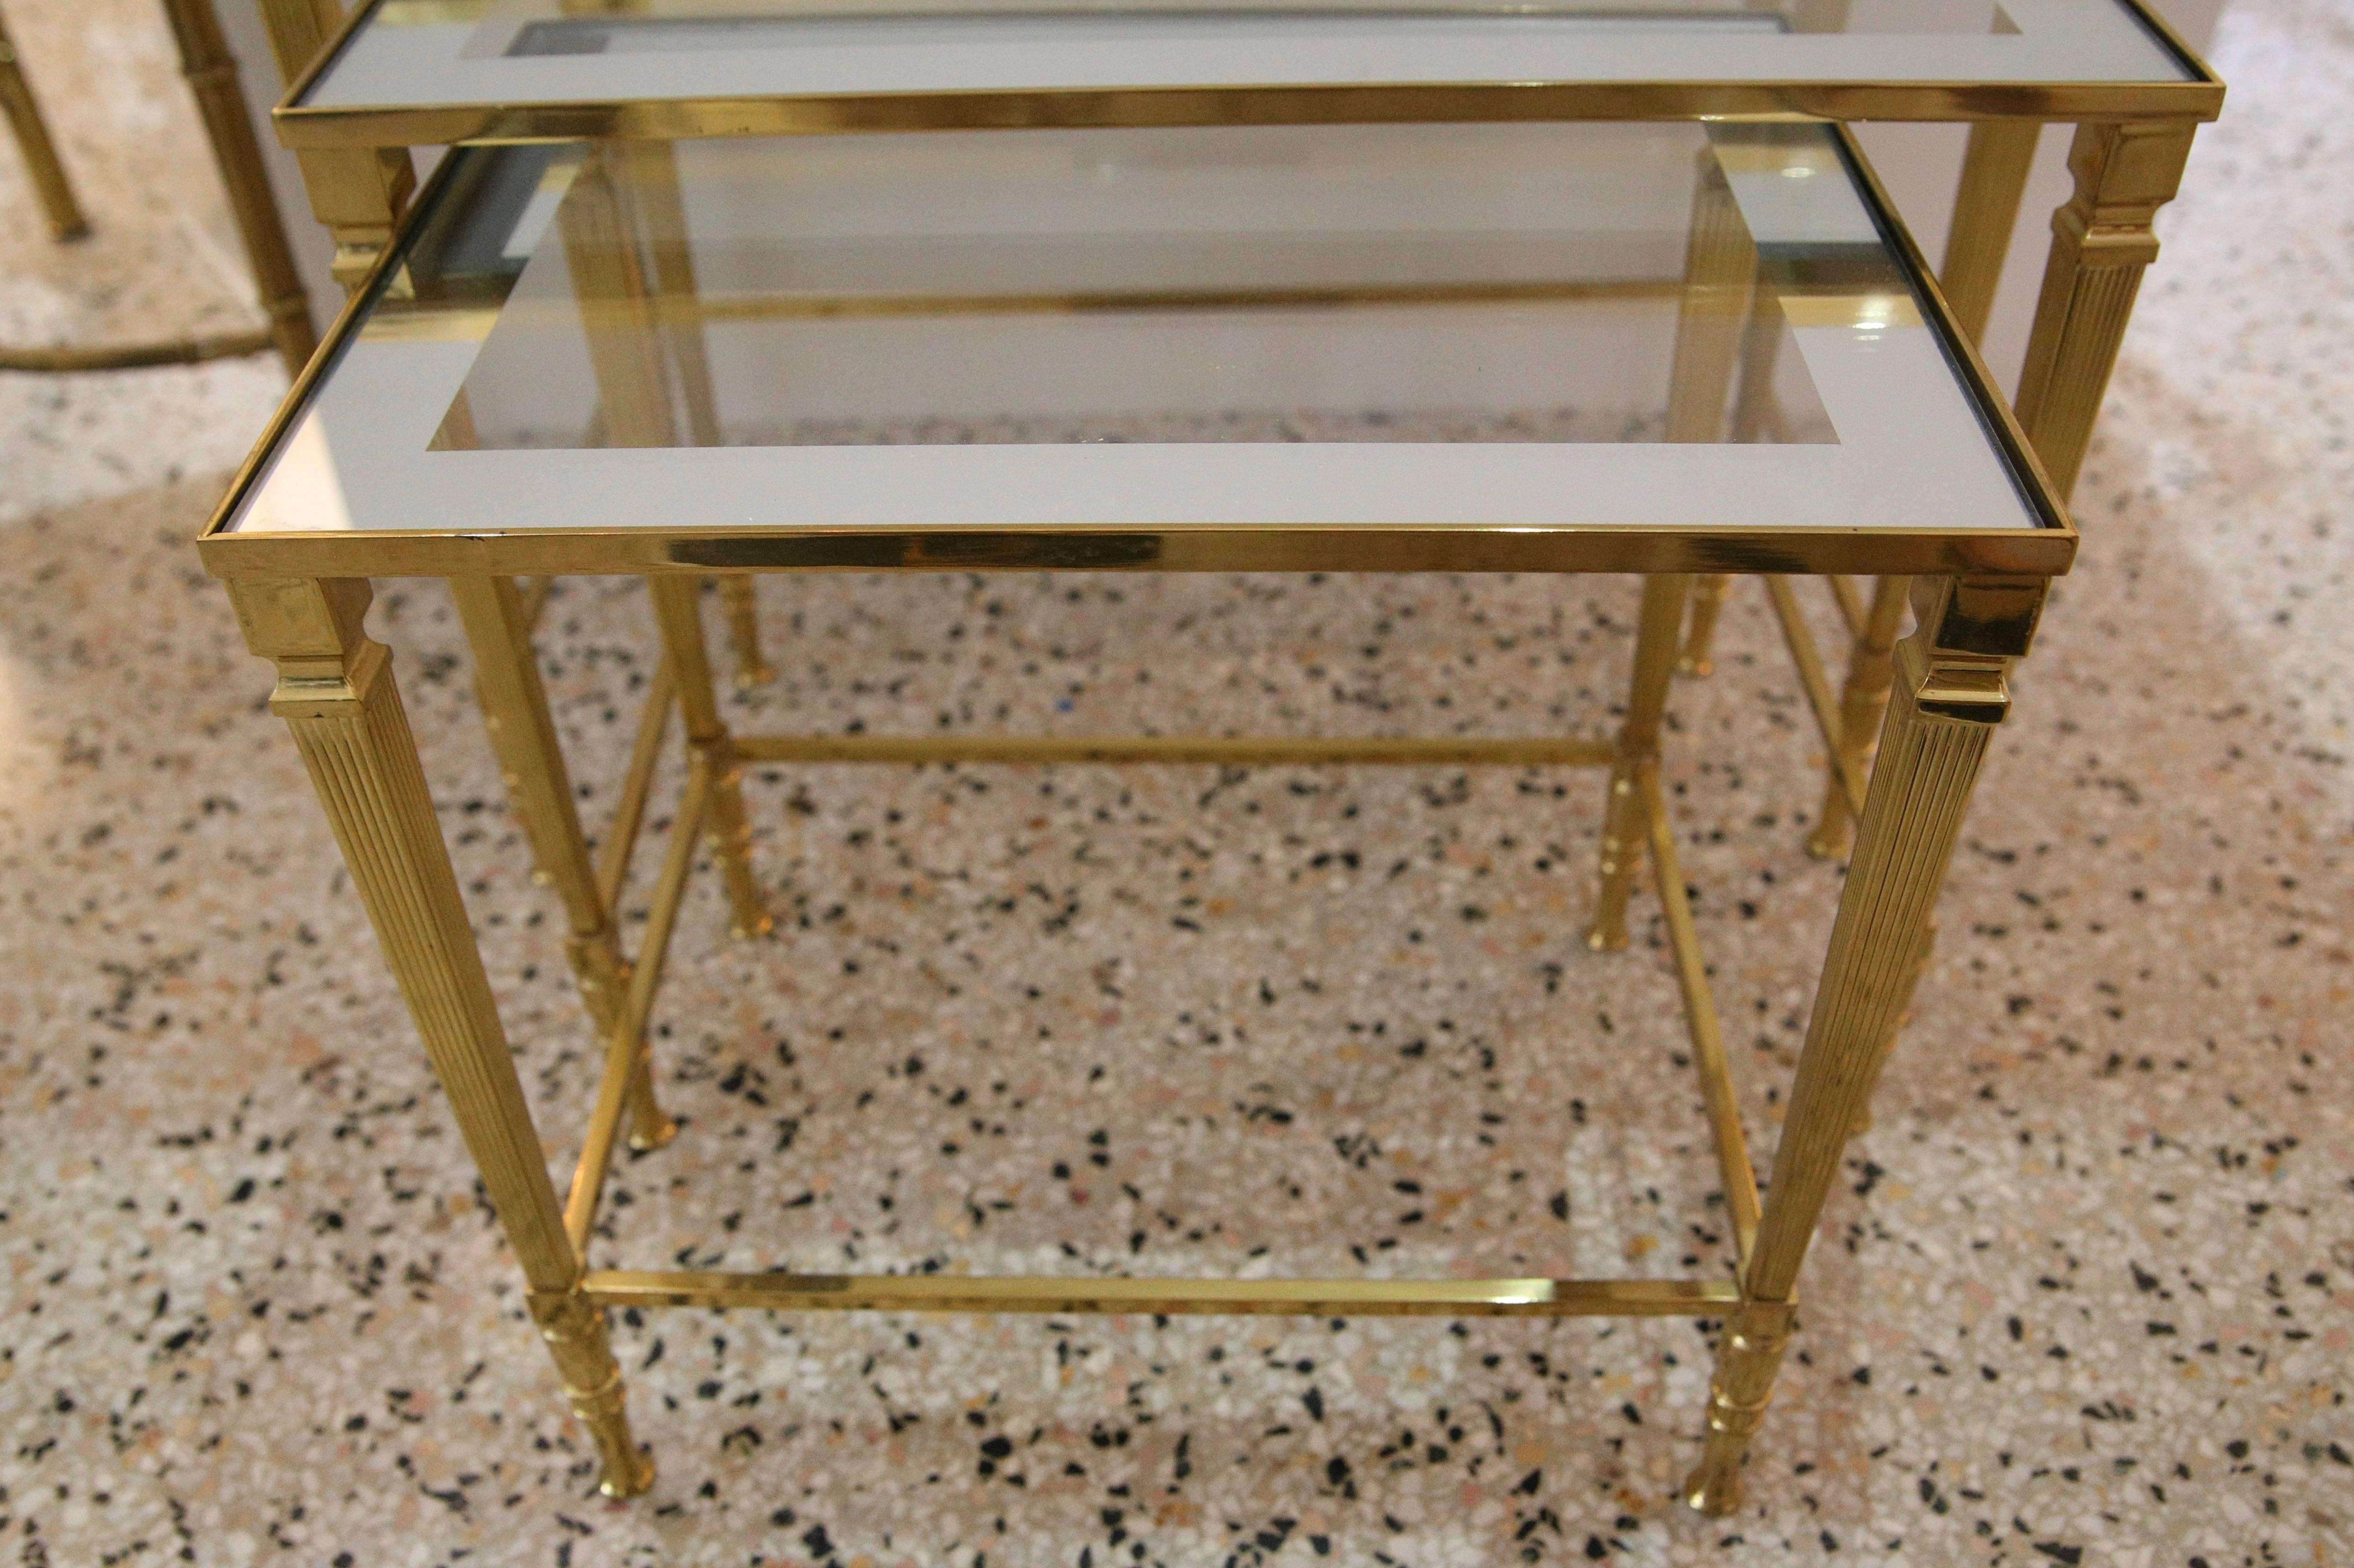  Nesting Tables in Brass, Glass and Mirror 1